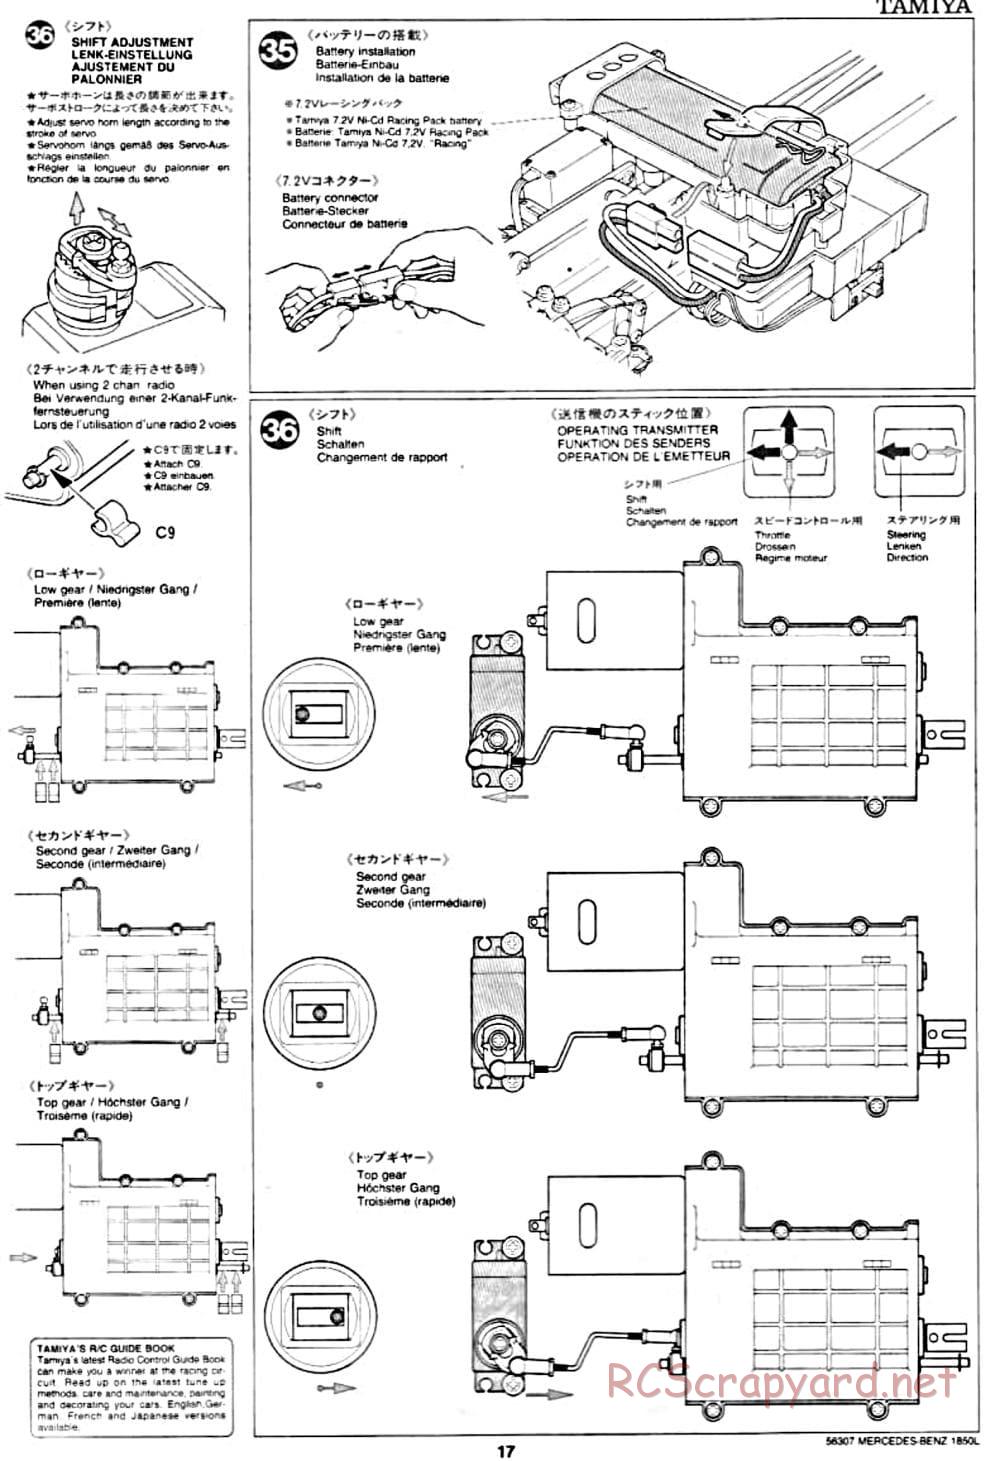 Tamiya - Mercedes-Benz 1850L Delivery Truck - Manual - Page 17